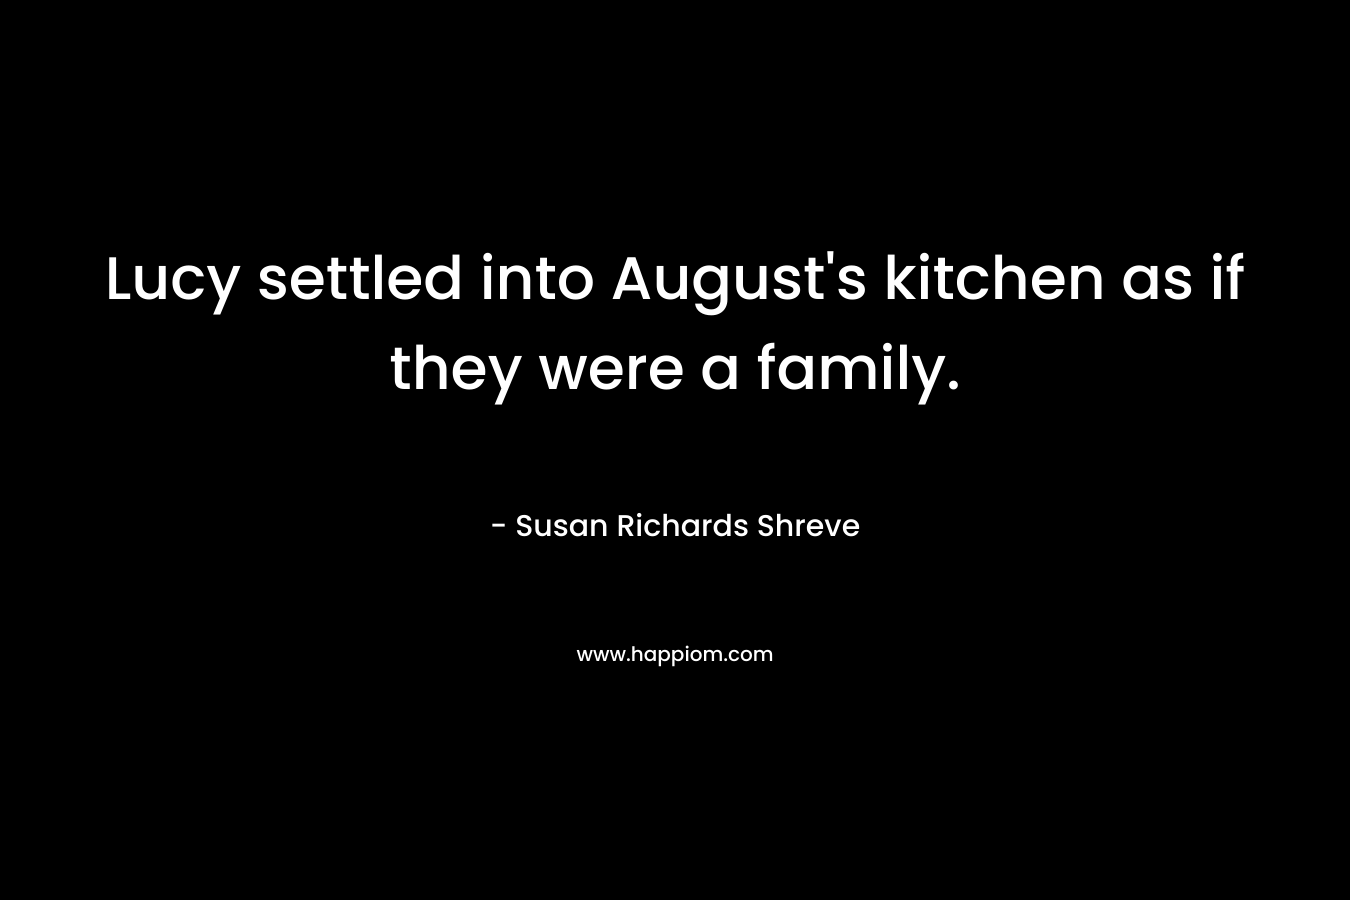 Lucy settled into August’s kitchen as if they were a family. – Susan Richards Shreve